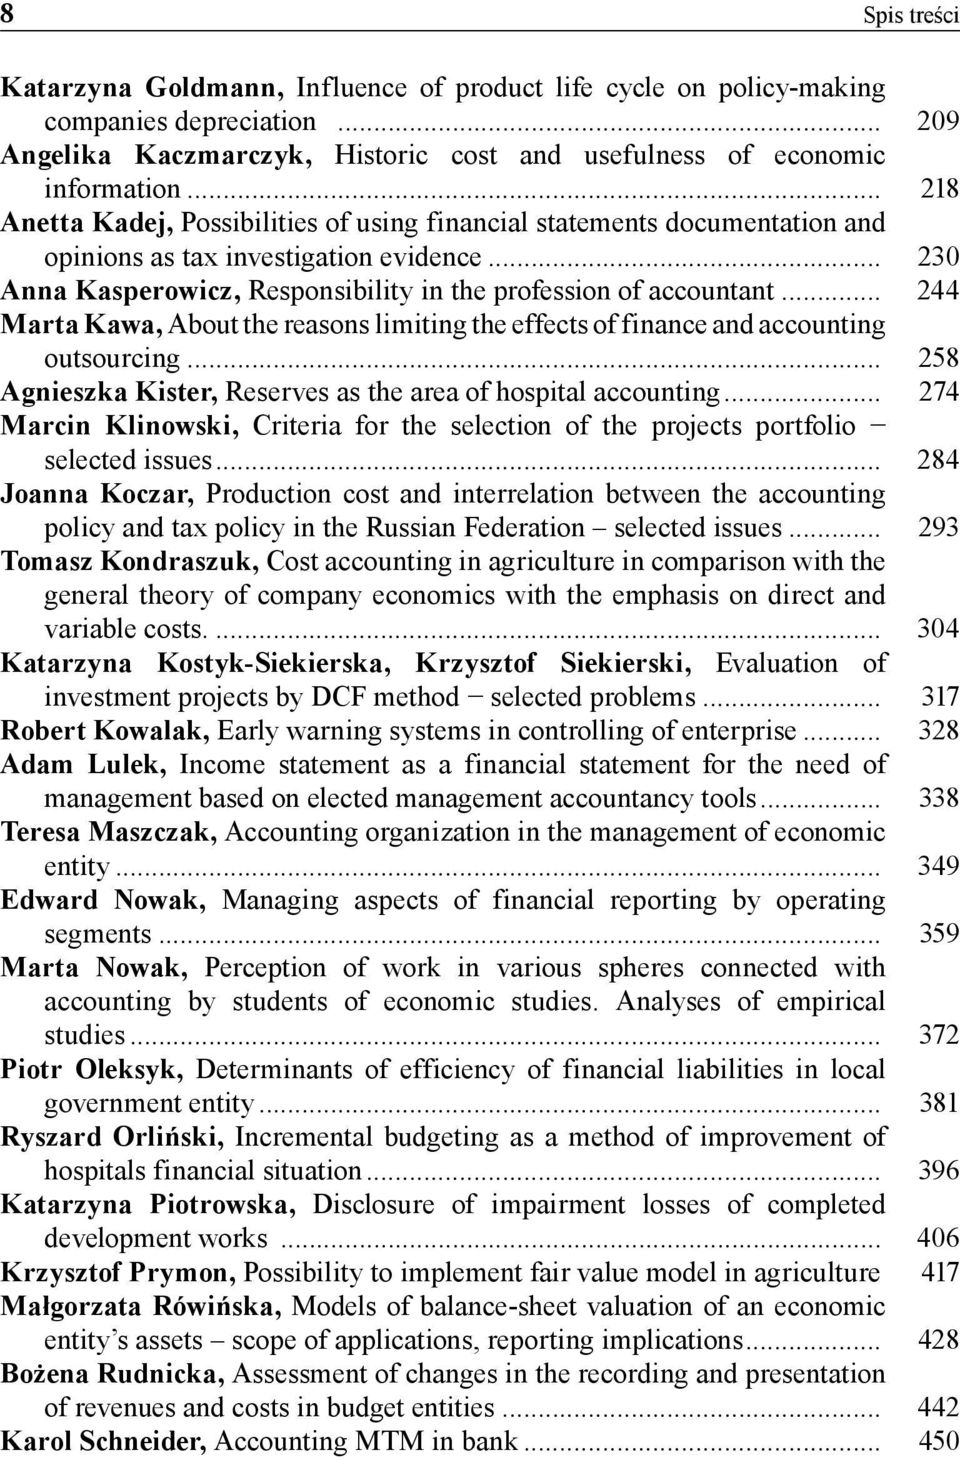 .. 244 Marta Kawa, About the reasons limiting the effects of finance and accounting outsourcing... 258 Agnieszka Kister, Reserves as the area of hospital accounting.